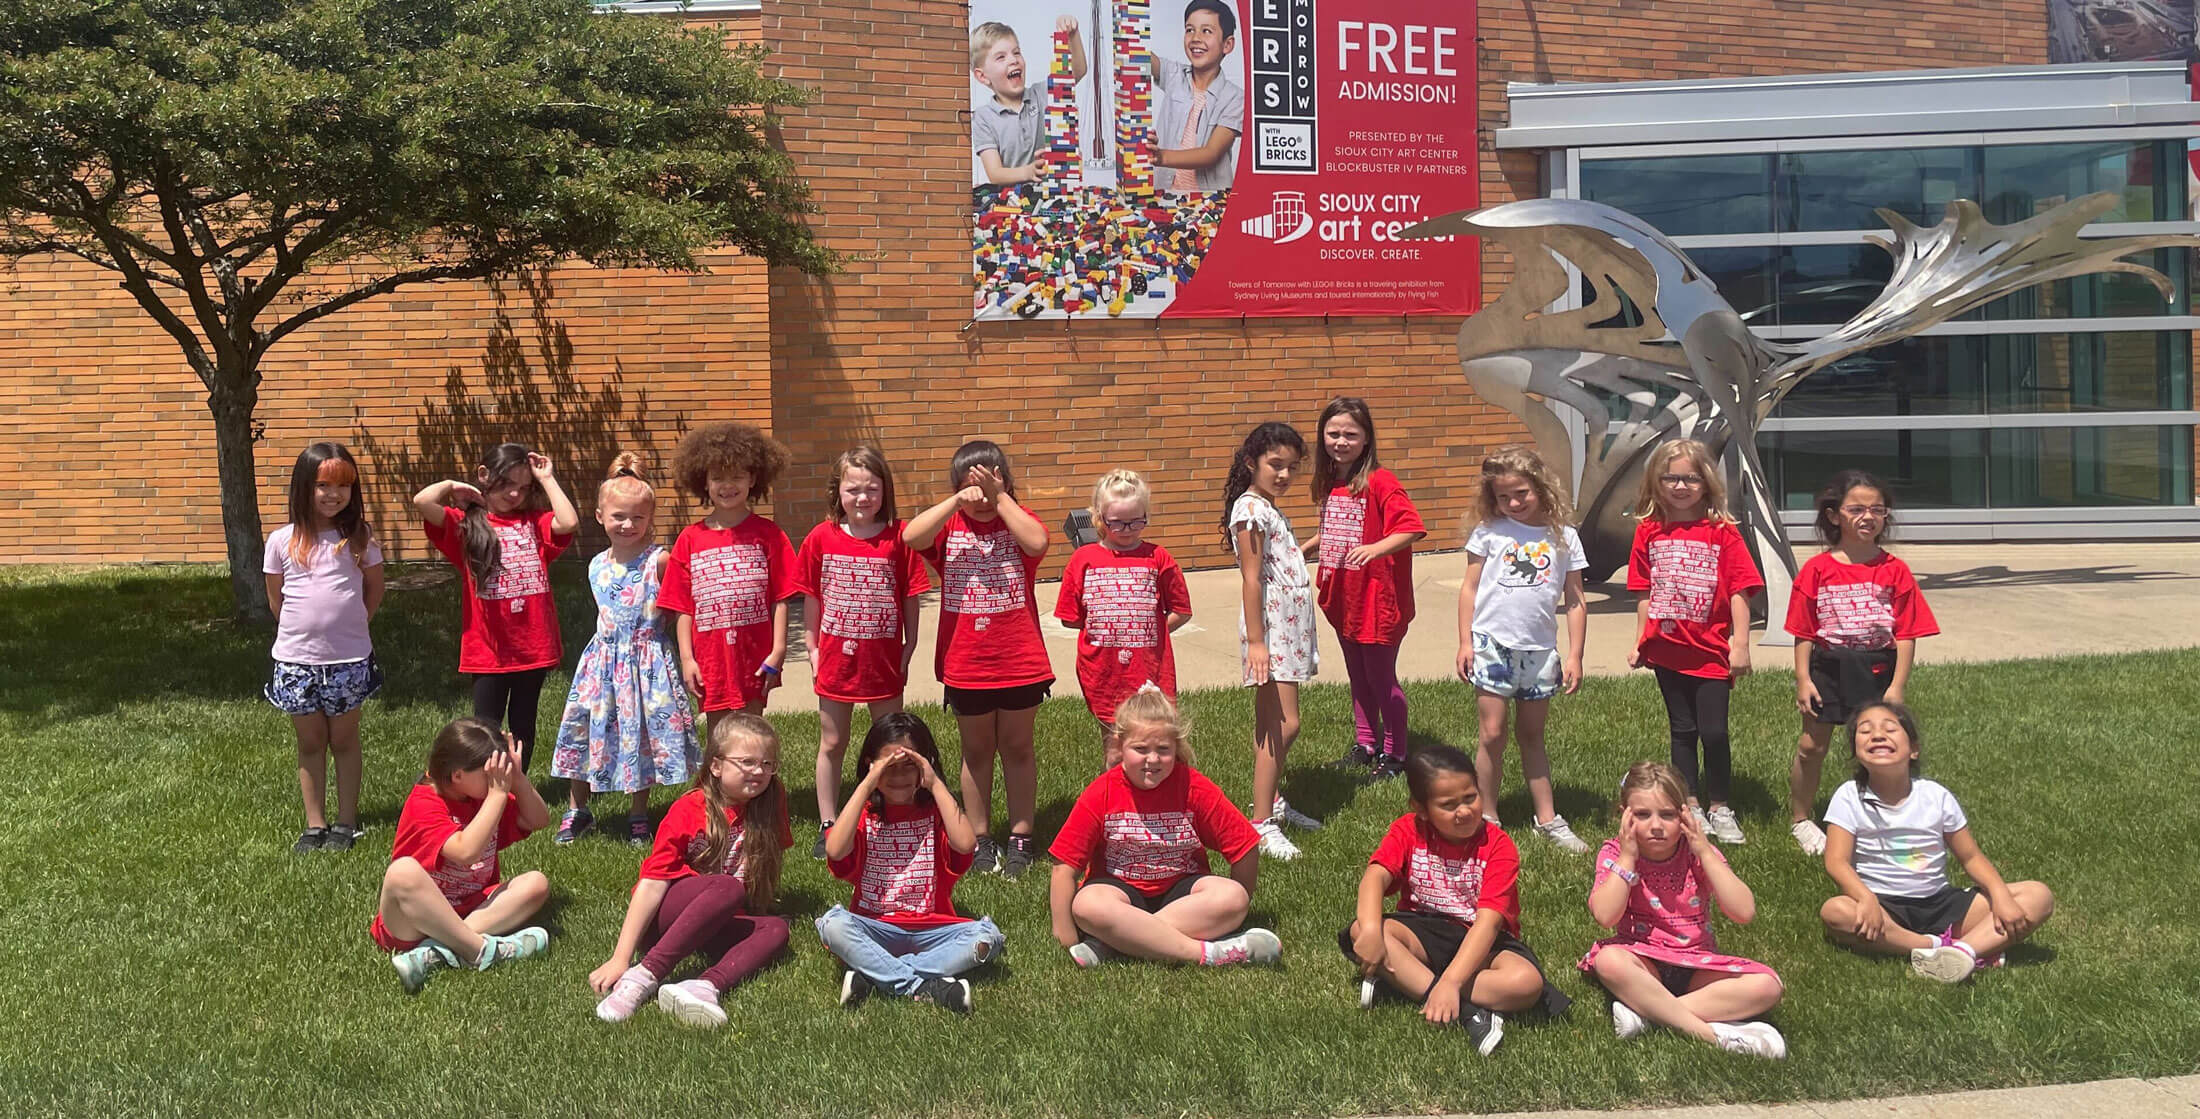 A group of girls participating in The Girls Inc Summer 2022 Program stands outside Sioux City Art Center